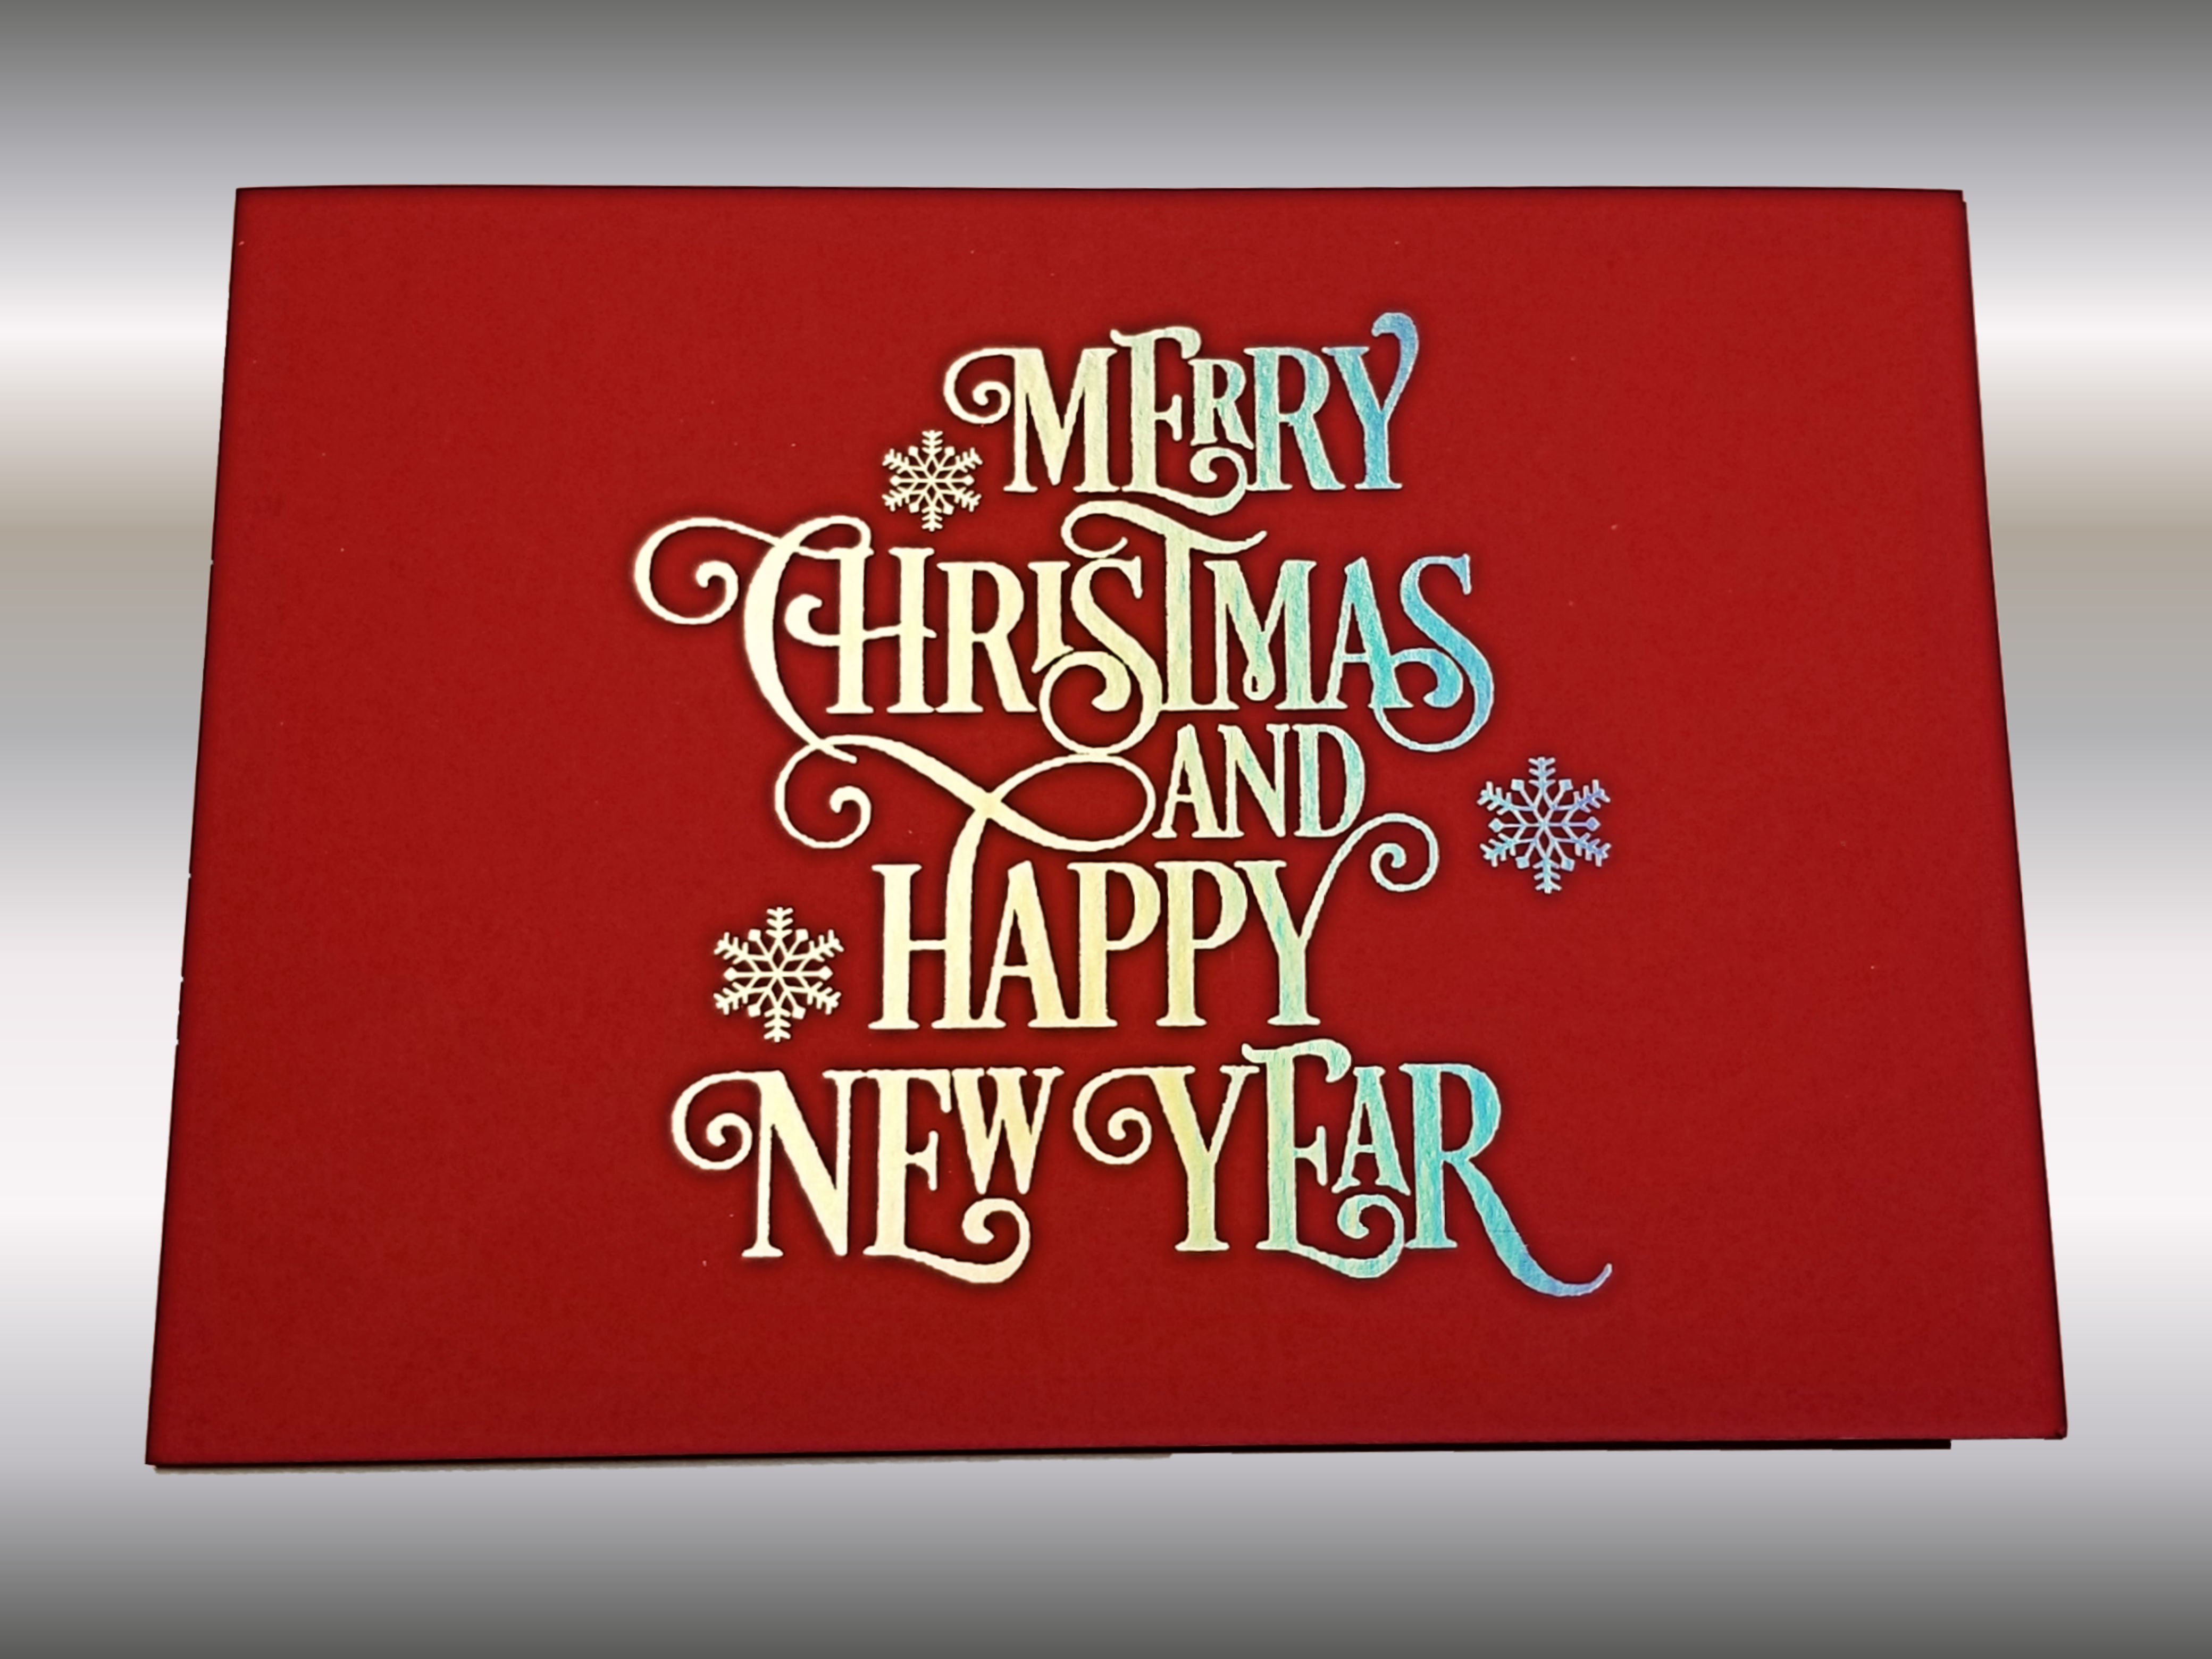 3 Colors Foilstamped Diecut Christmas Card Cover